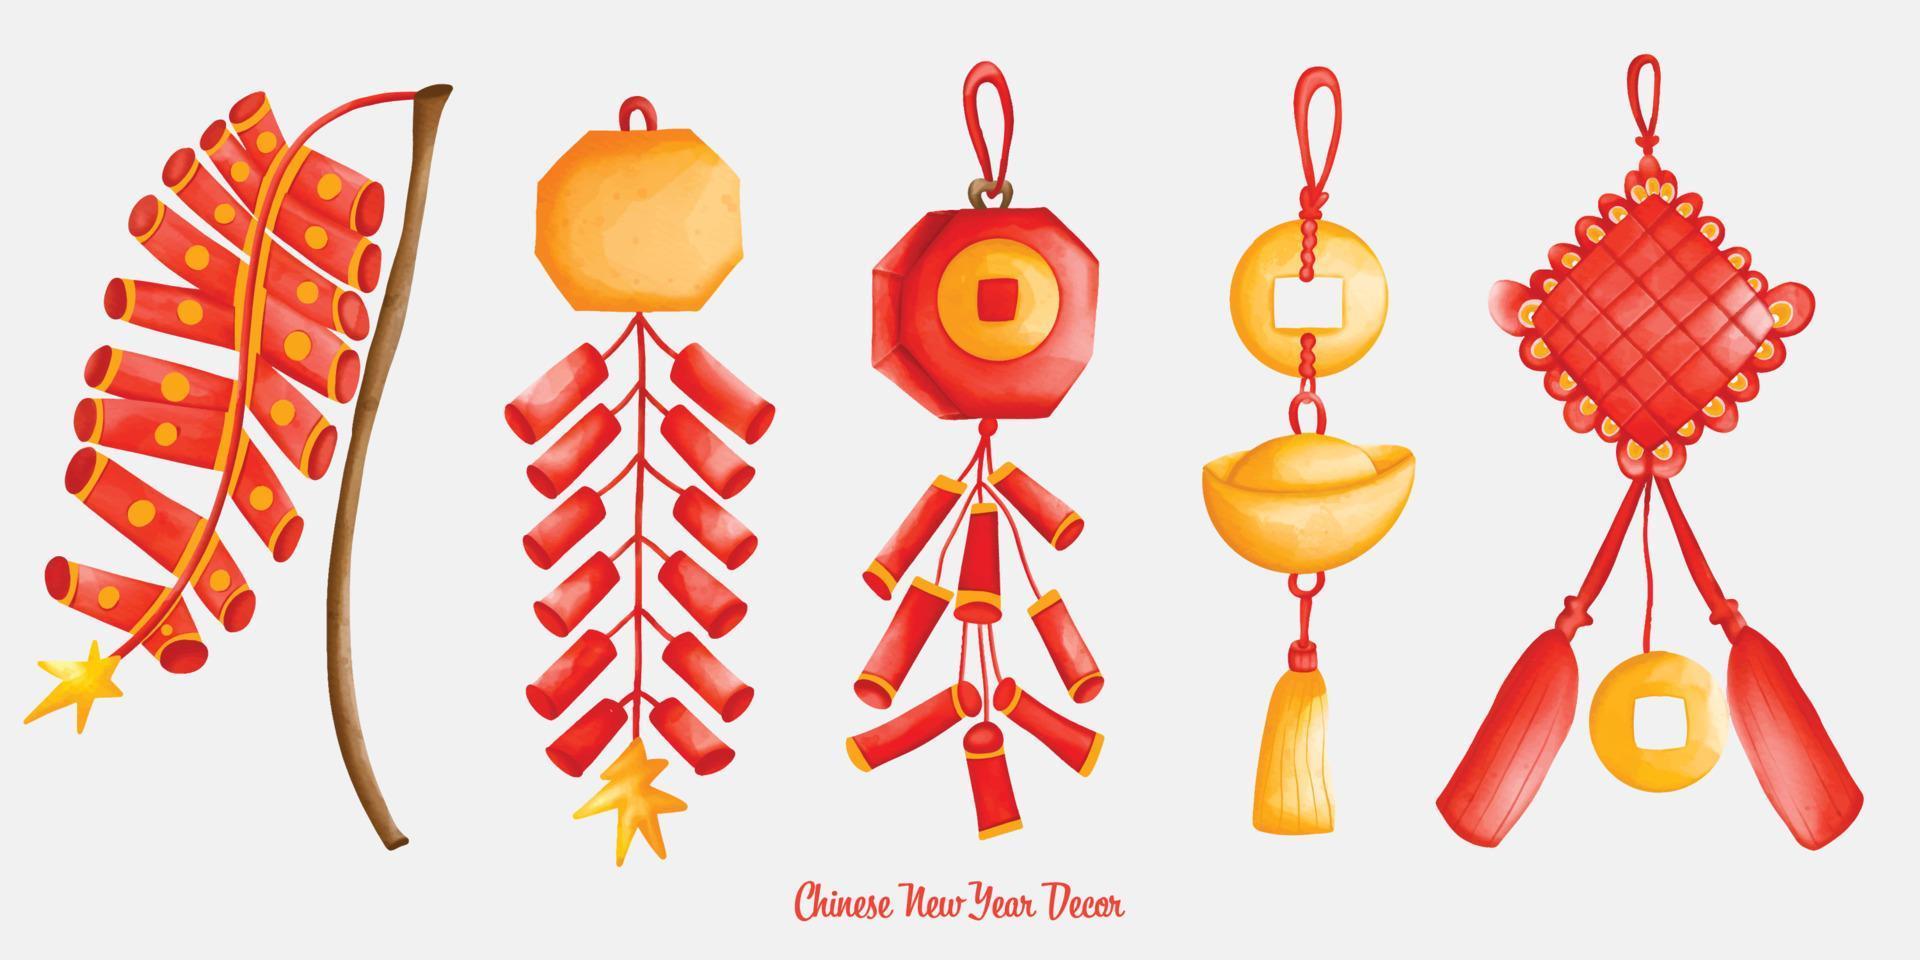 Firecracker, Chinese New Year decoration vector